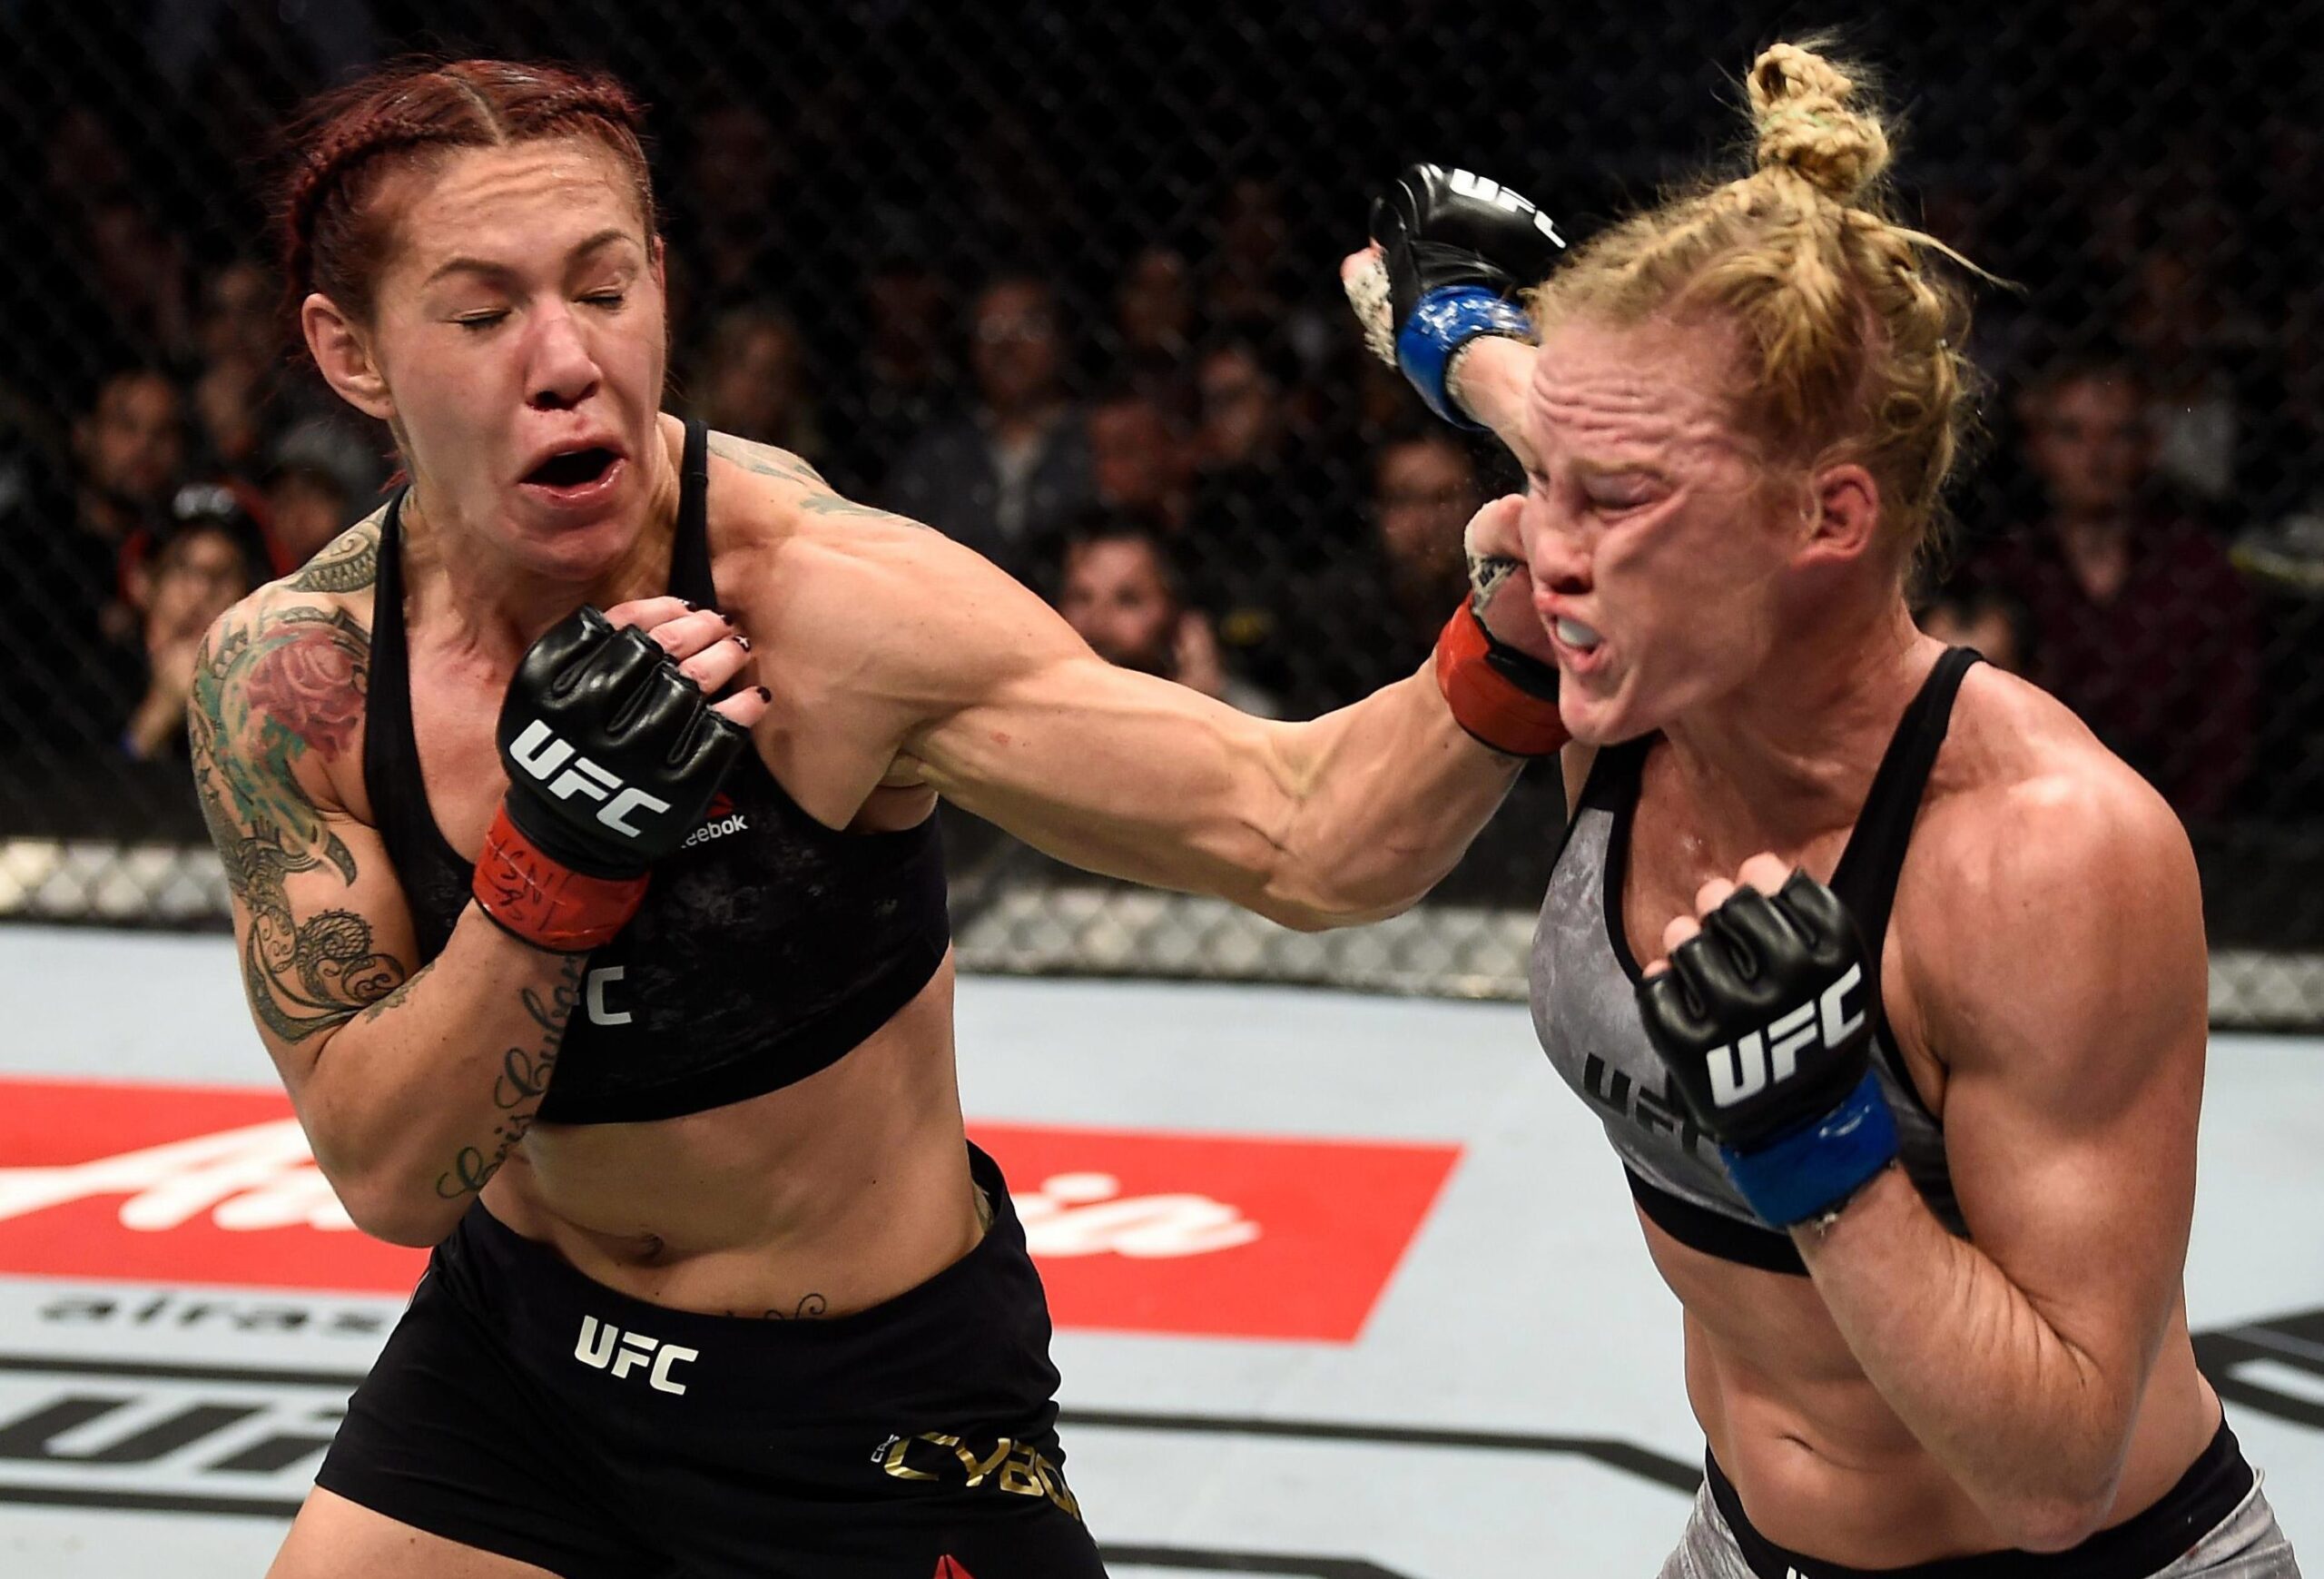 Cris Cyborg strong left hand punch over Holly Holm at UFC 219